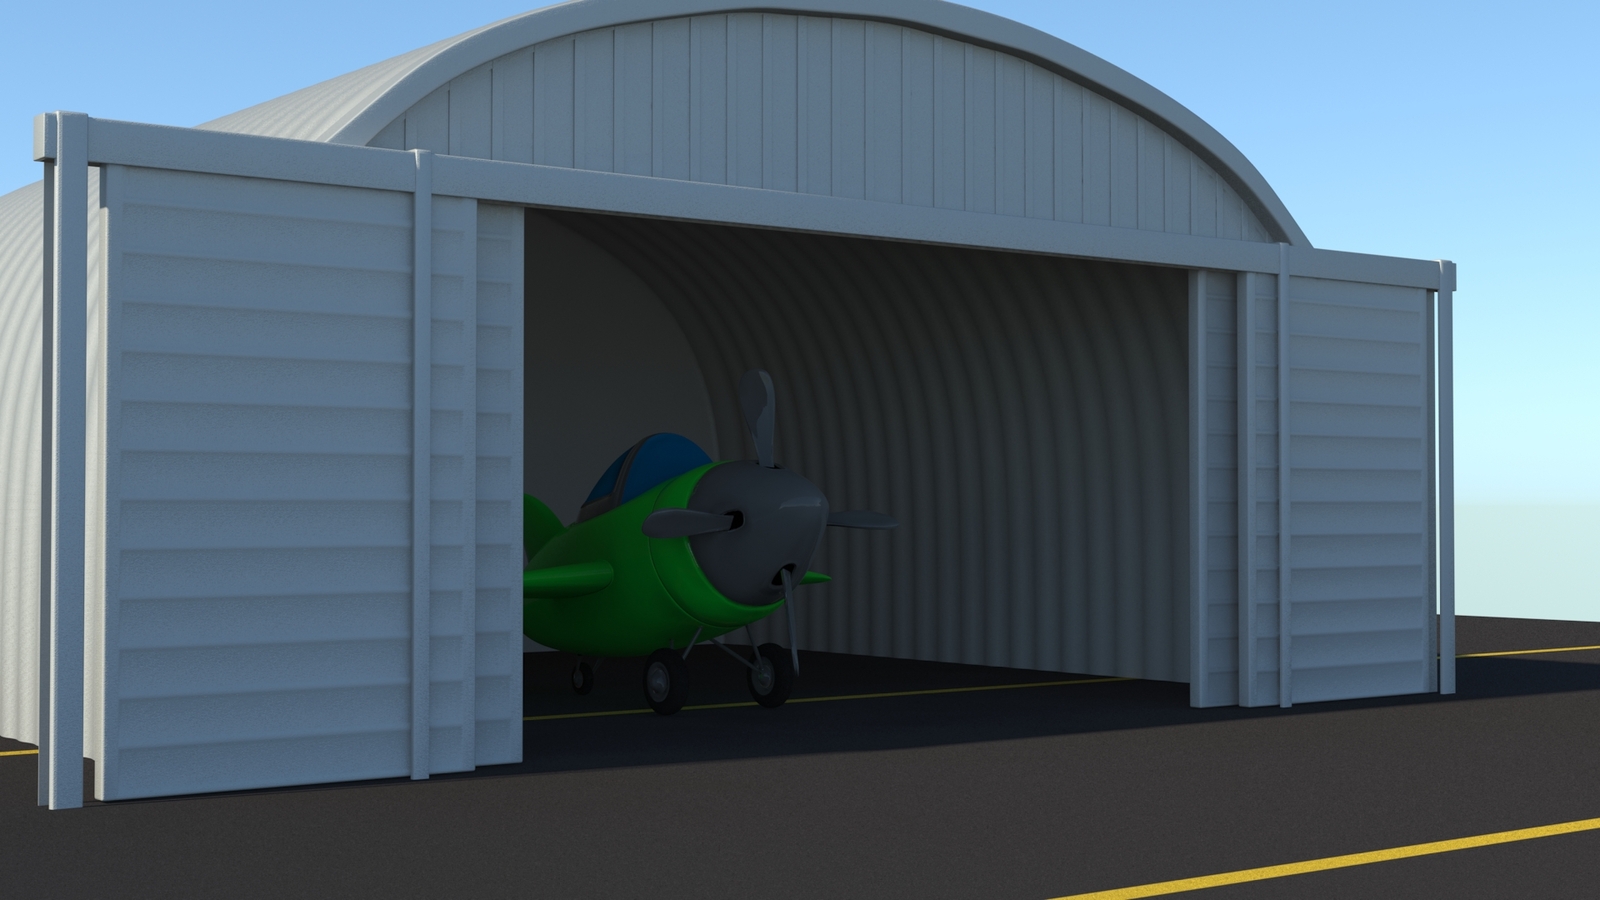 another shot of the hanger